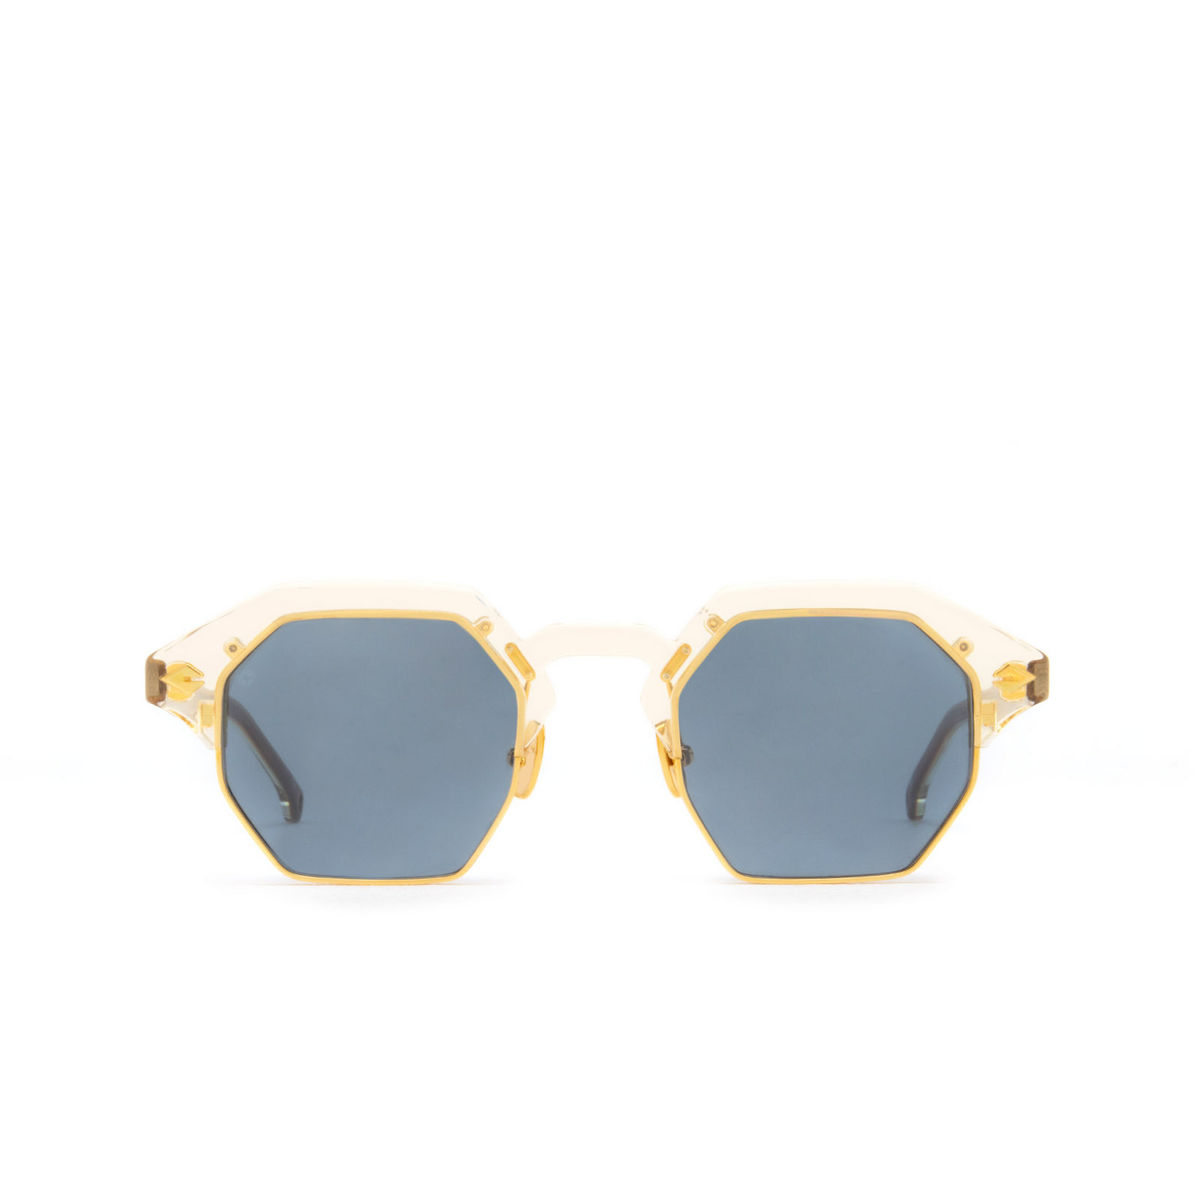 T Henri GULLIWING Sunglasses CHAMPAGNE - front view